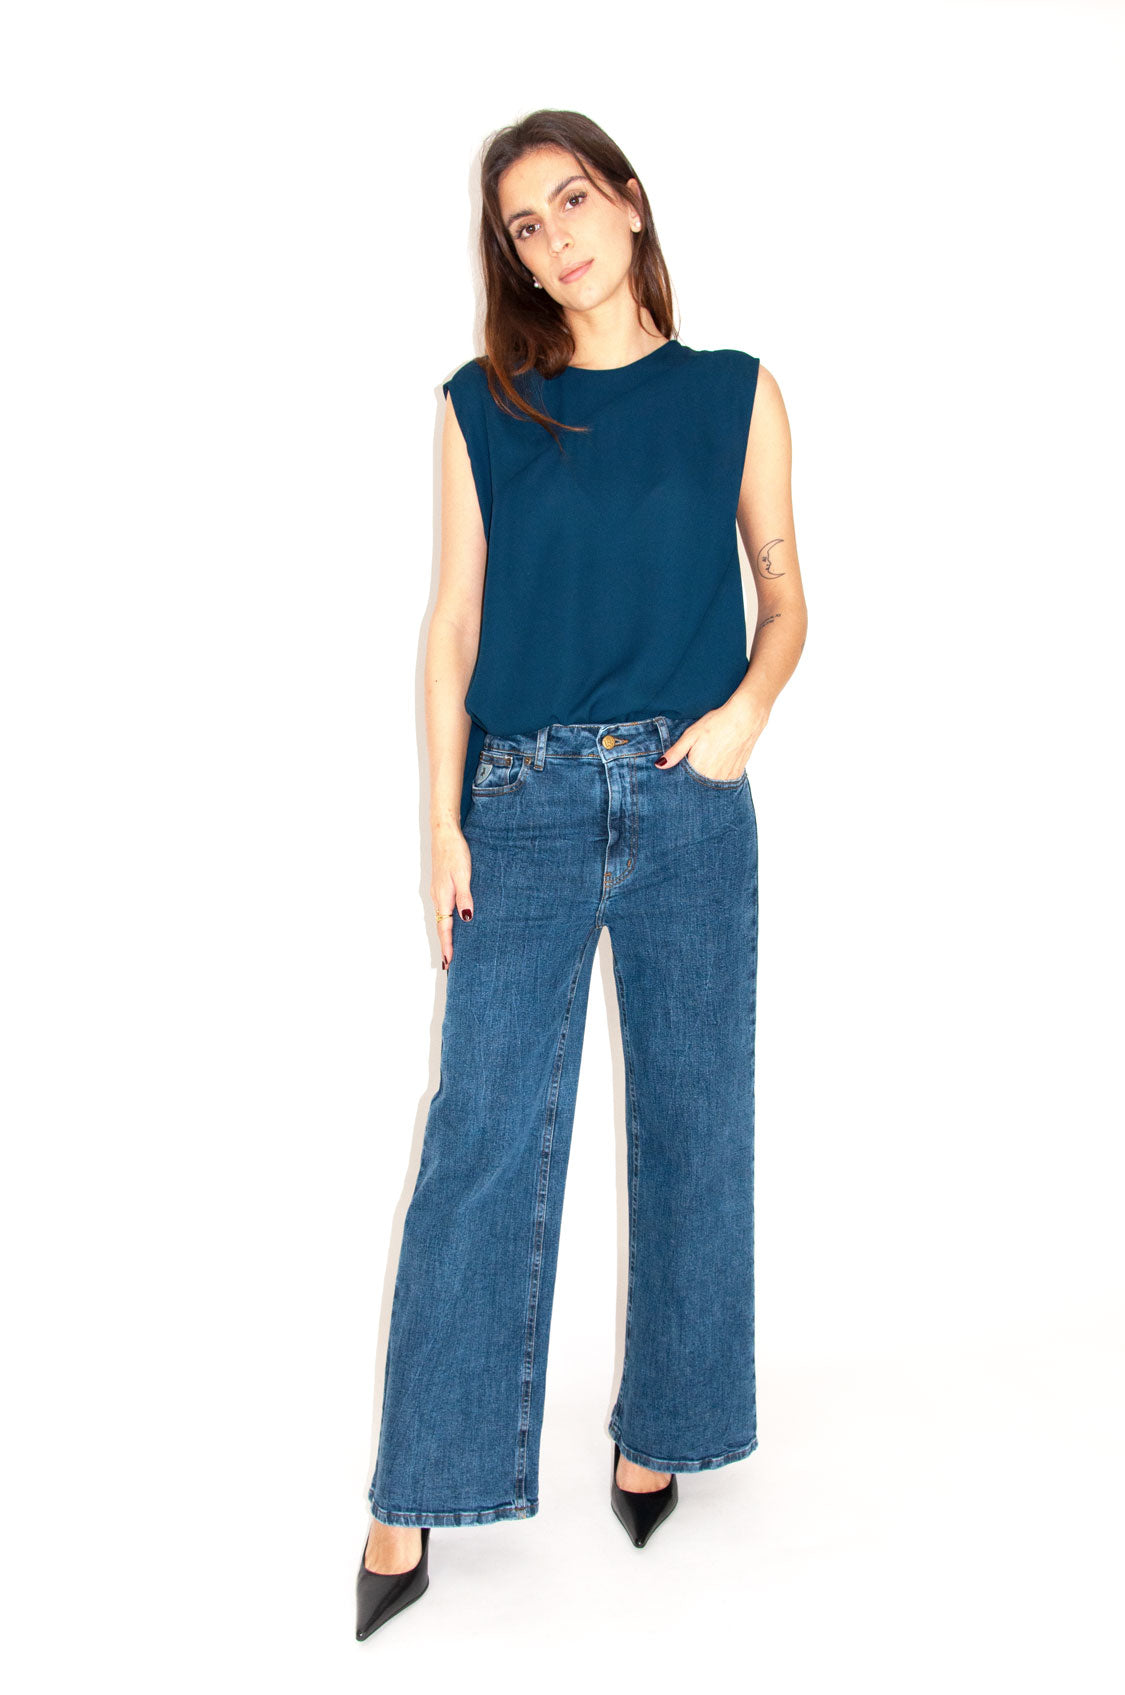 Jeans palazzo blue